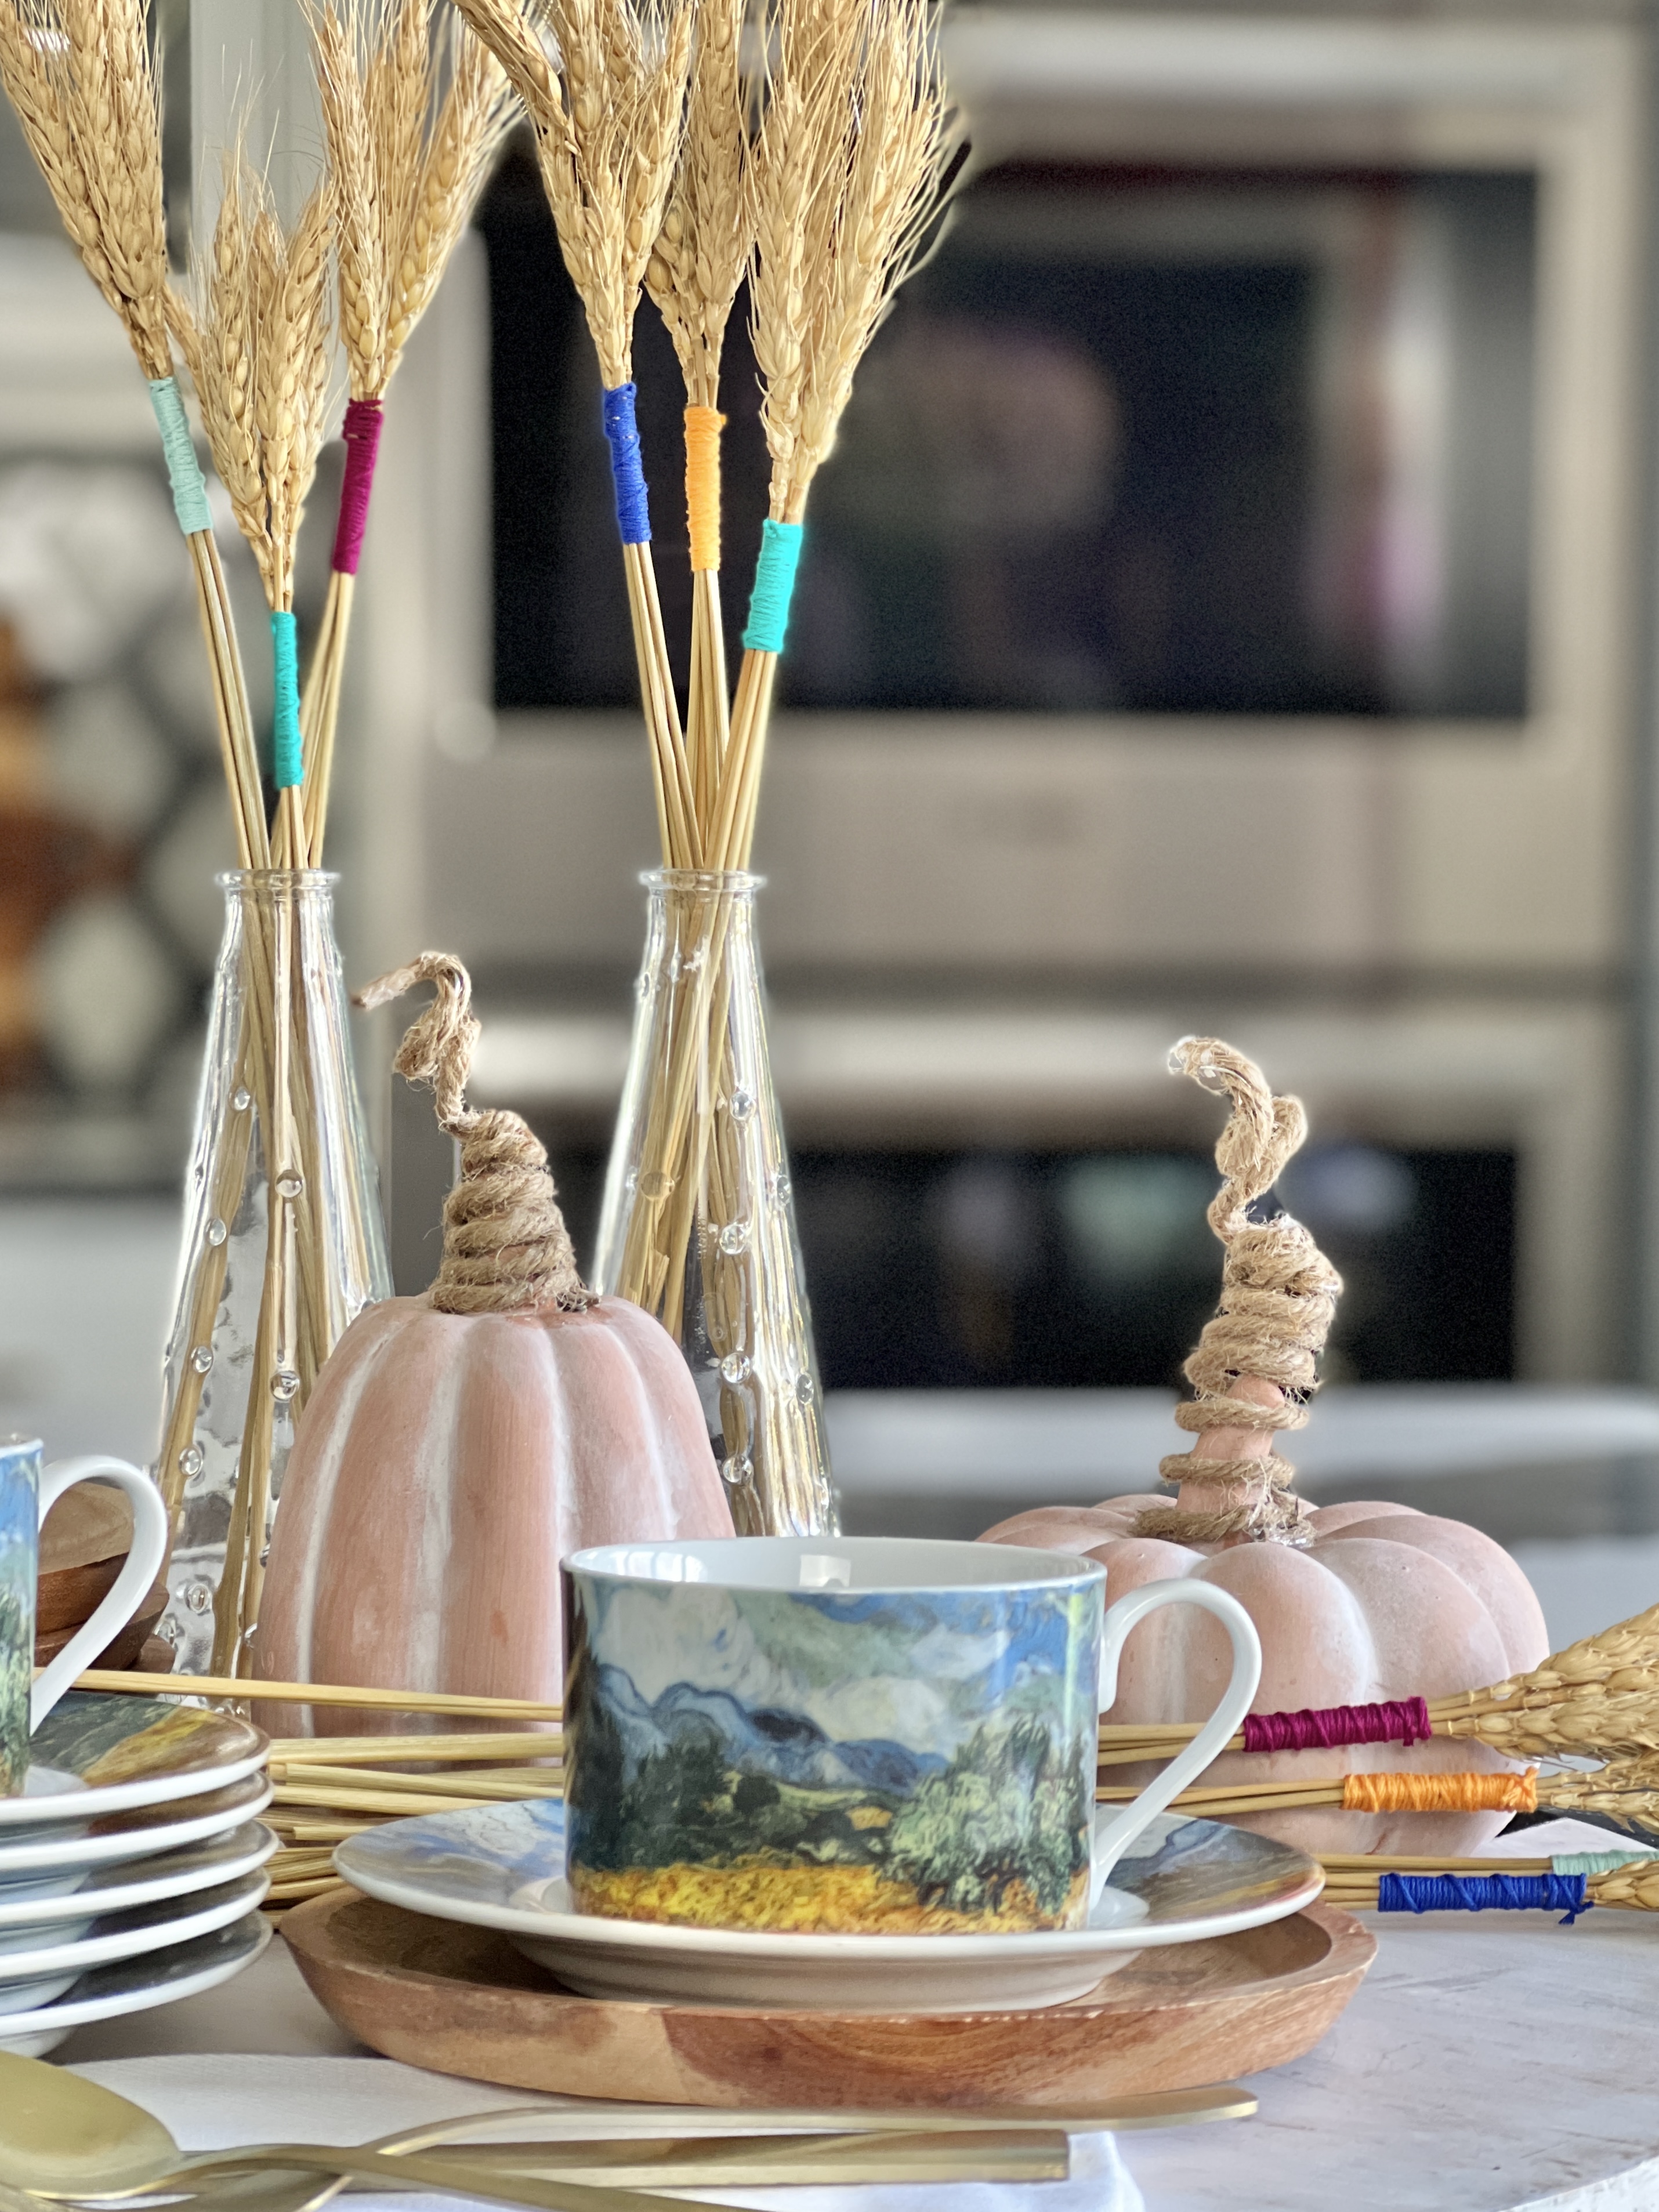 Smaller wheat bundles fit perfectly in small glass vases as an easy Thanksgiving decor idea for your table.